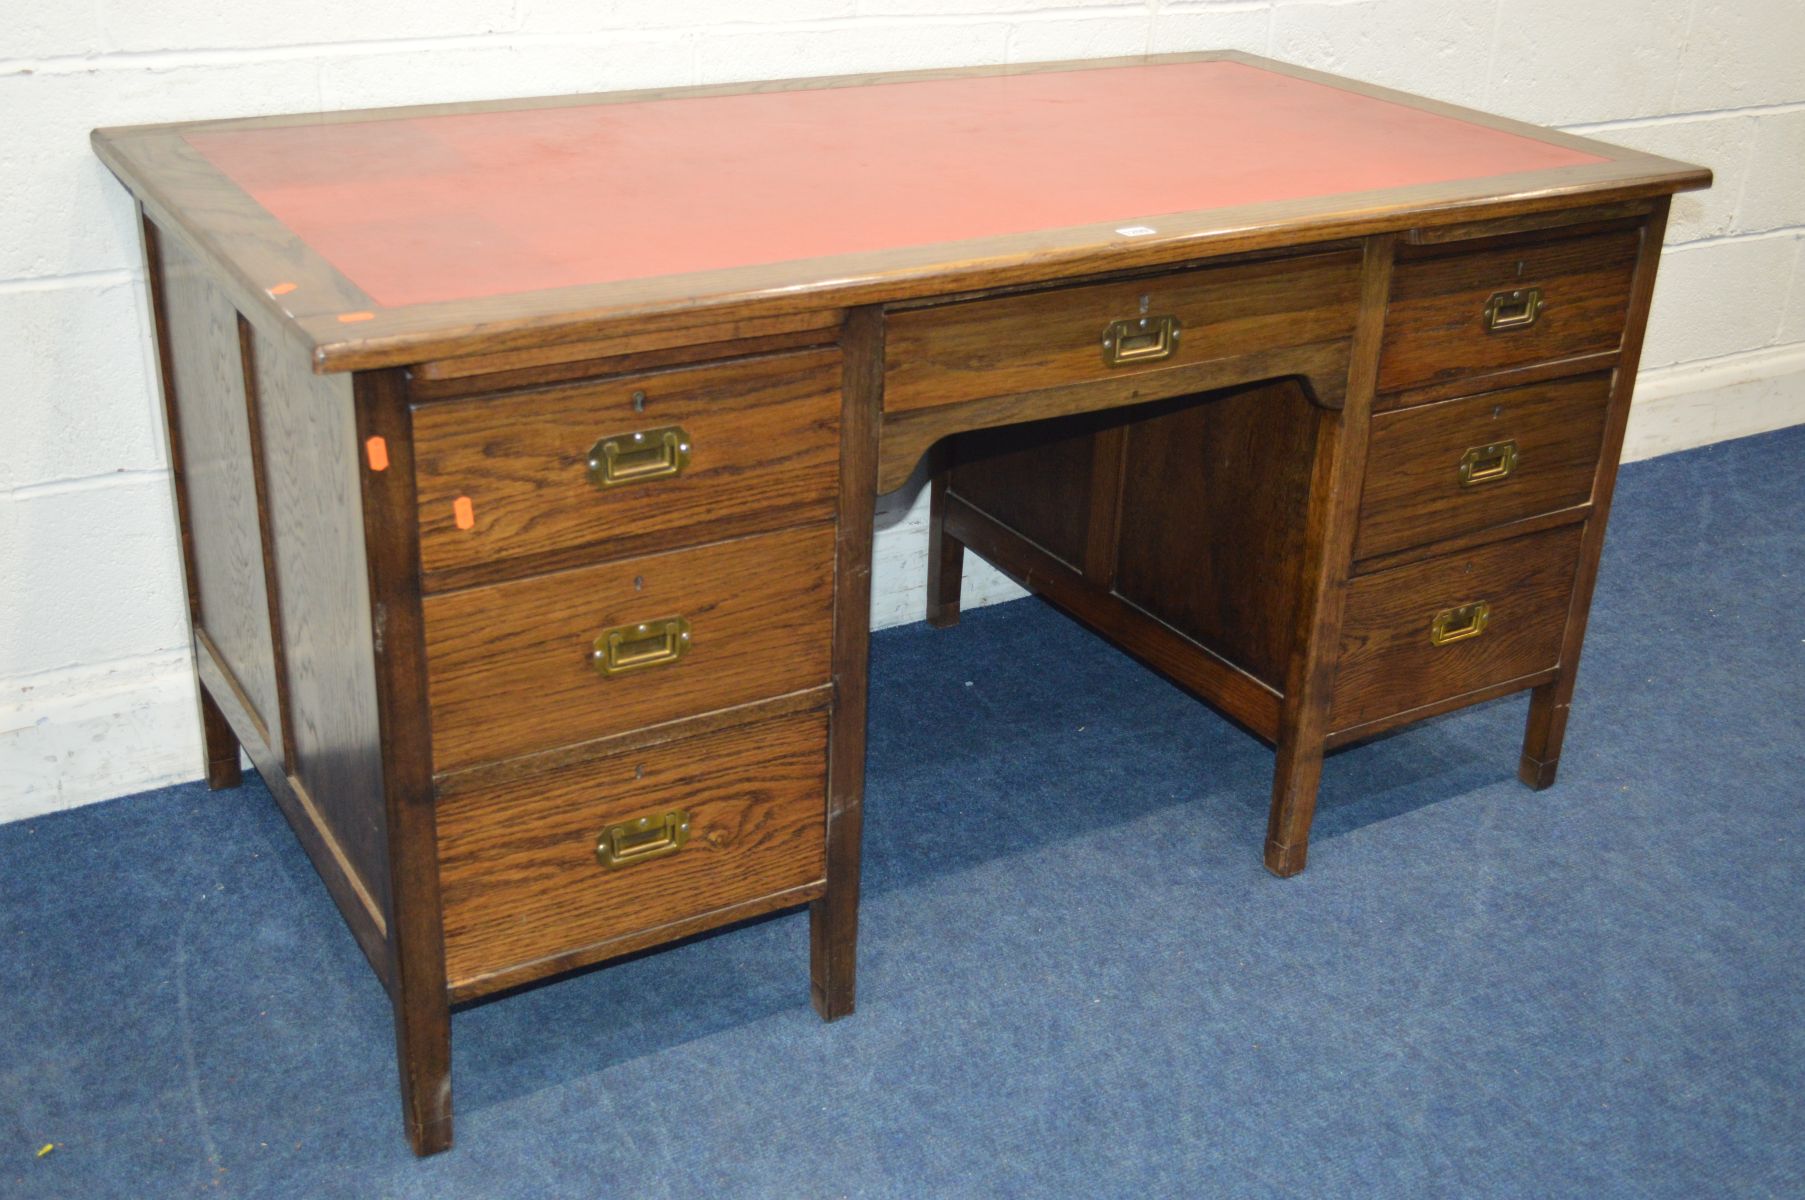 A MID 20TH CENTURY STAINED OAK KNEE HOLE DESK, with a red leather top and seven drawers with brass - Image 2 of 3